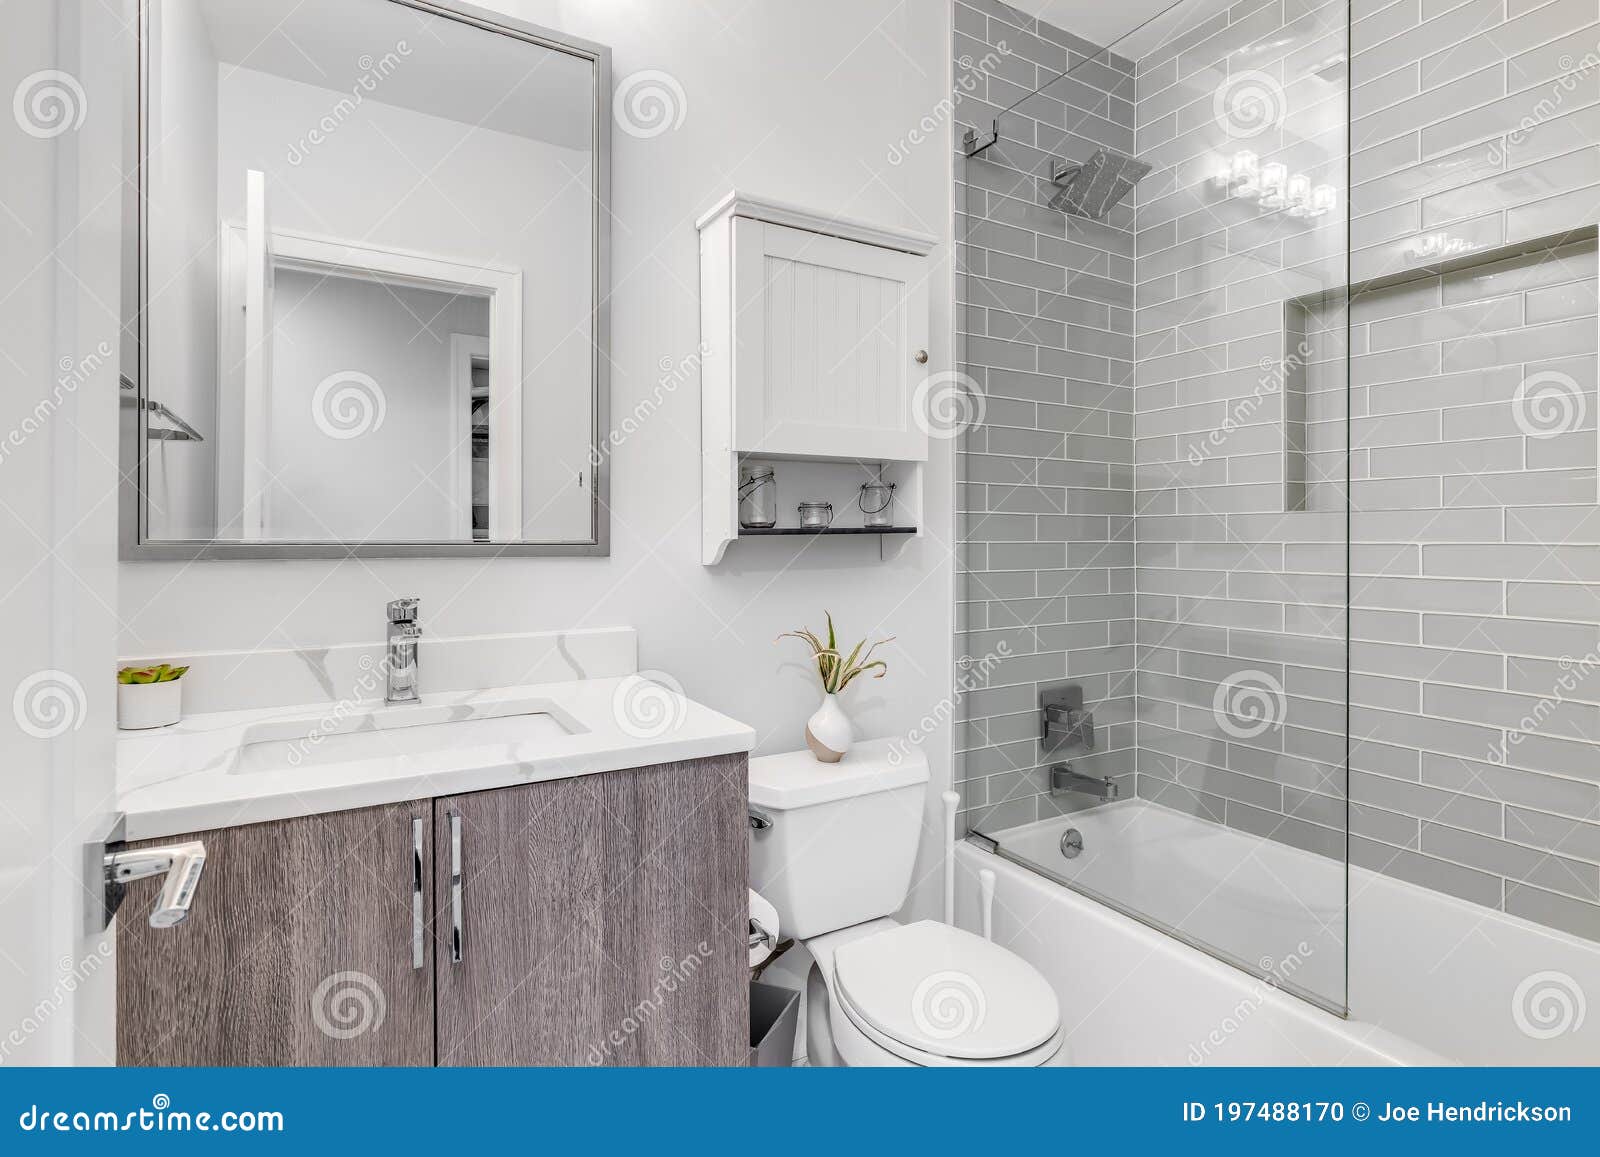 https://thumbs.dreamstime.com/z/small-luxurious-bathroom-custom-tile-shower-white-marble-chicago-il-usa-june-counter-top-wood-cabinet-tiled-shelf-197488170.jpg